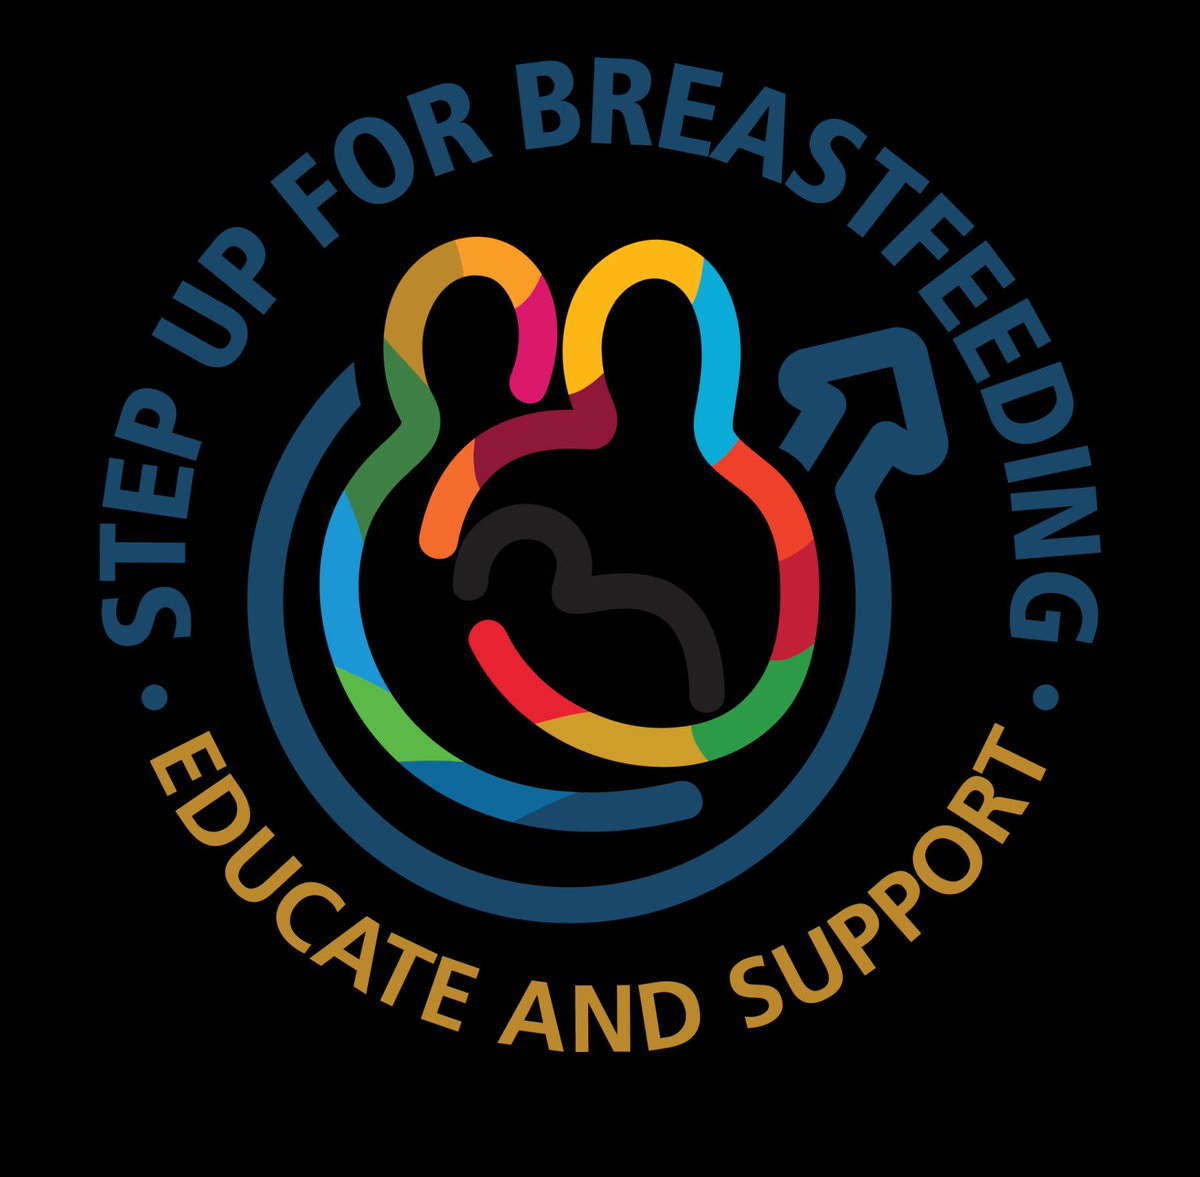 Happy World Breastfeeding Week 2022! Check out details of events happening locally, nationally & internationally #WBW2022 #stepupforbreastfeeding worldbreastfeedingweek.org